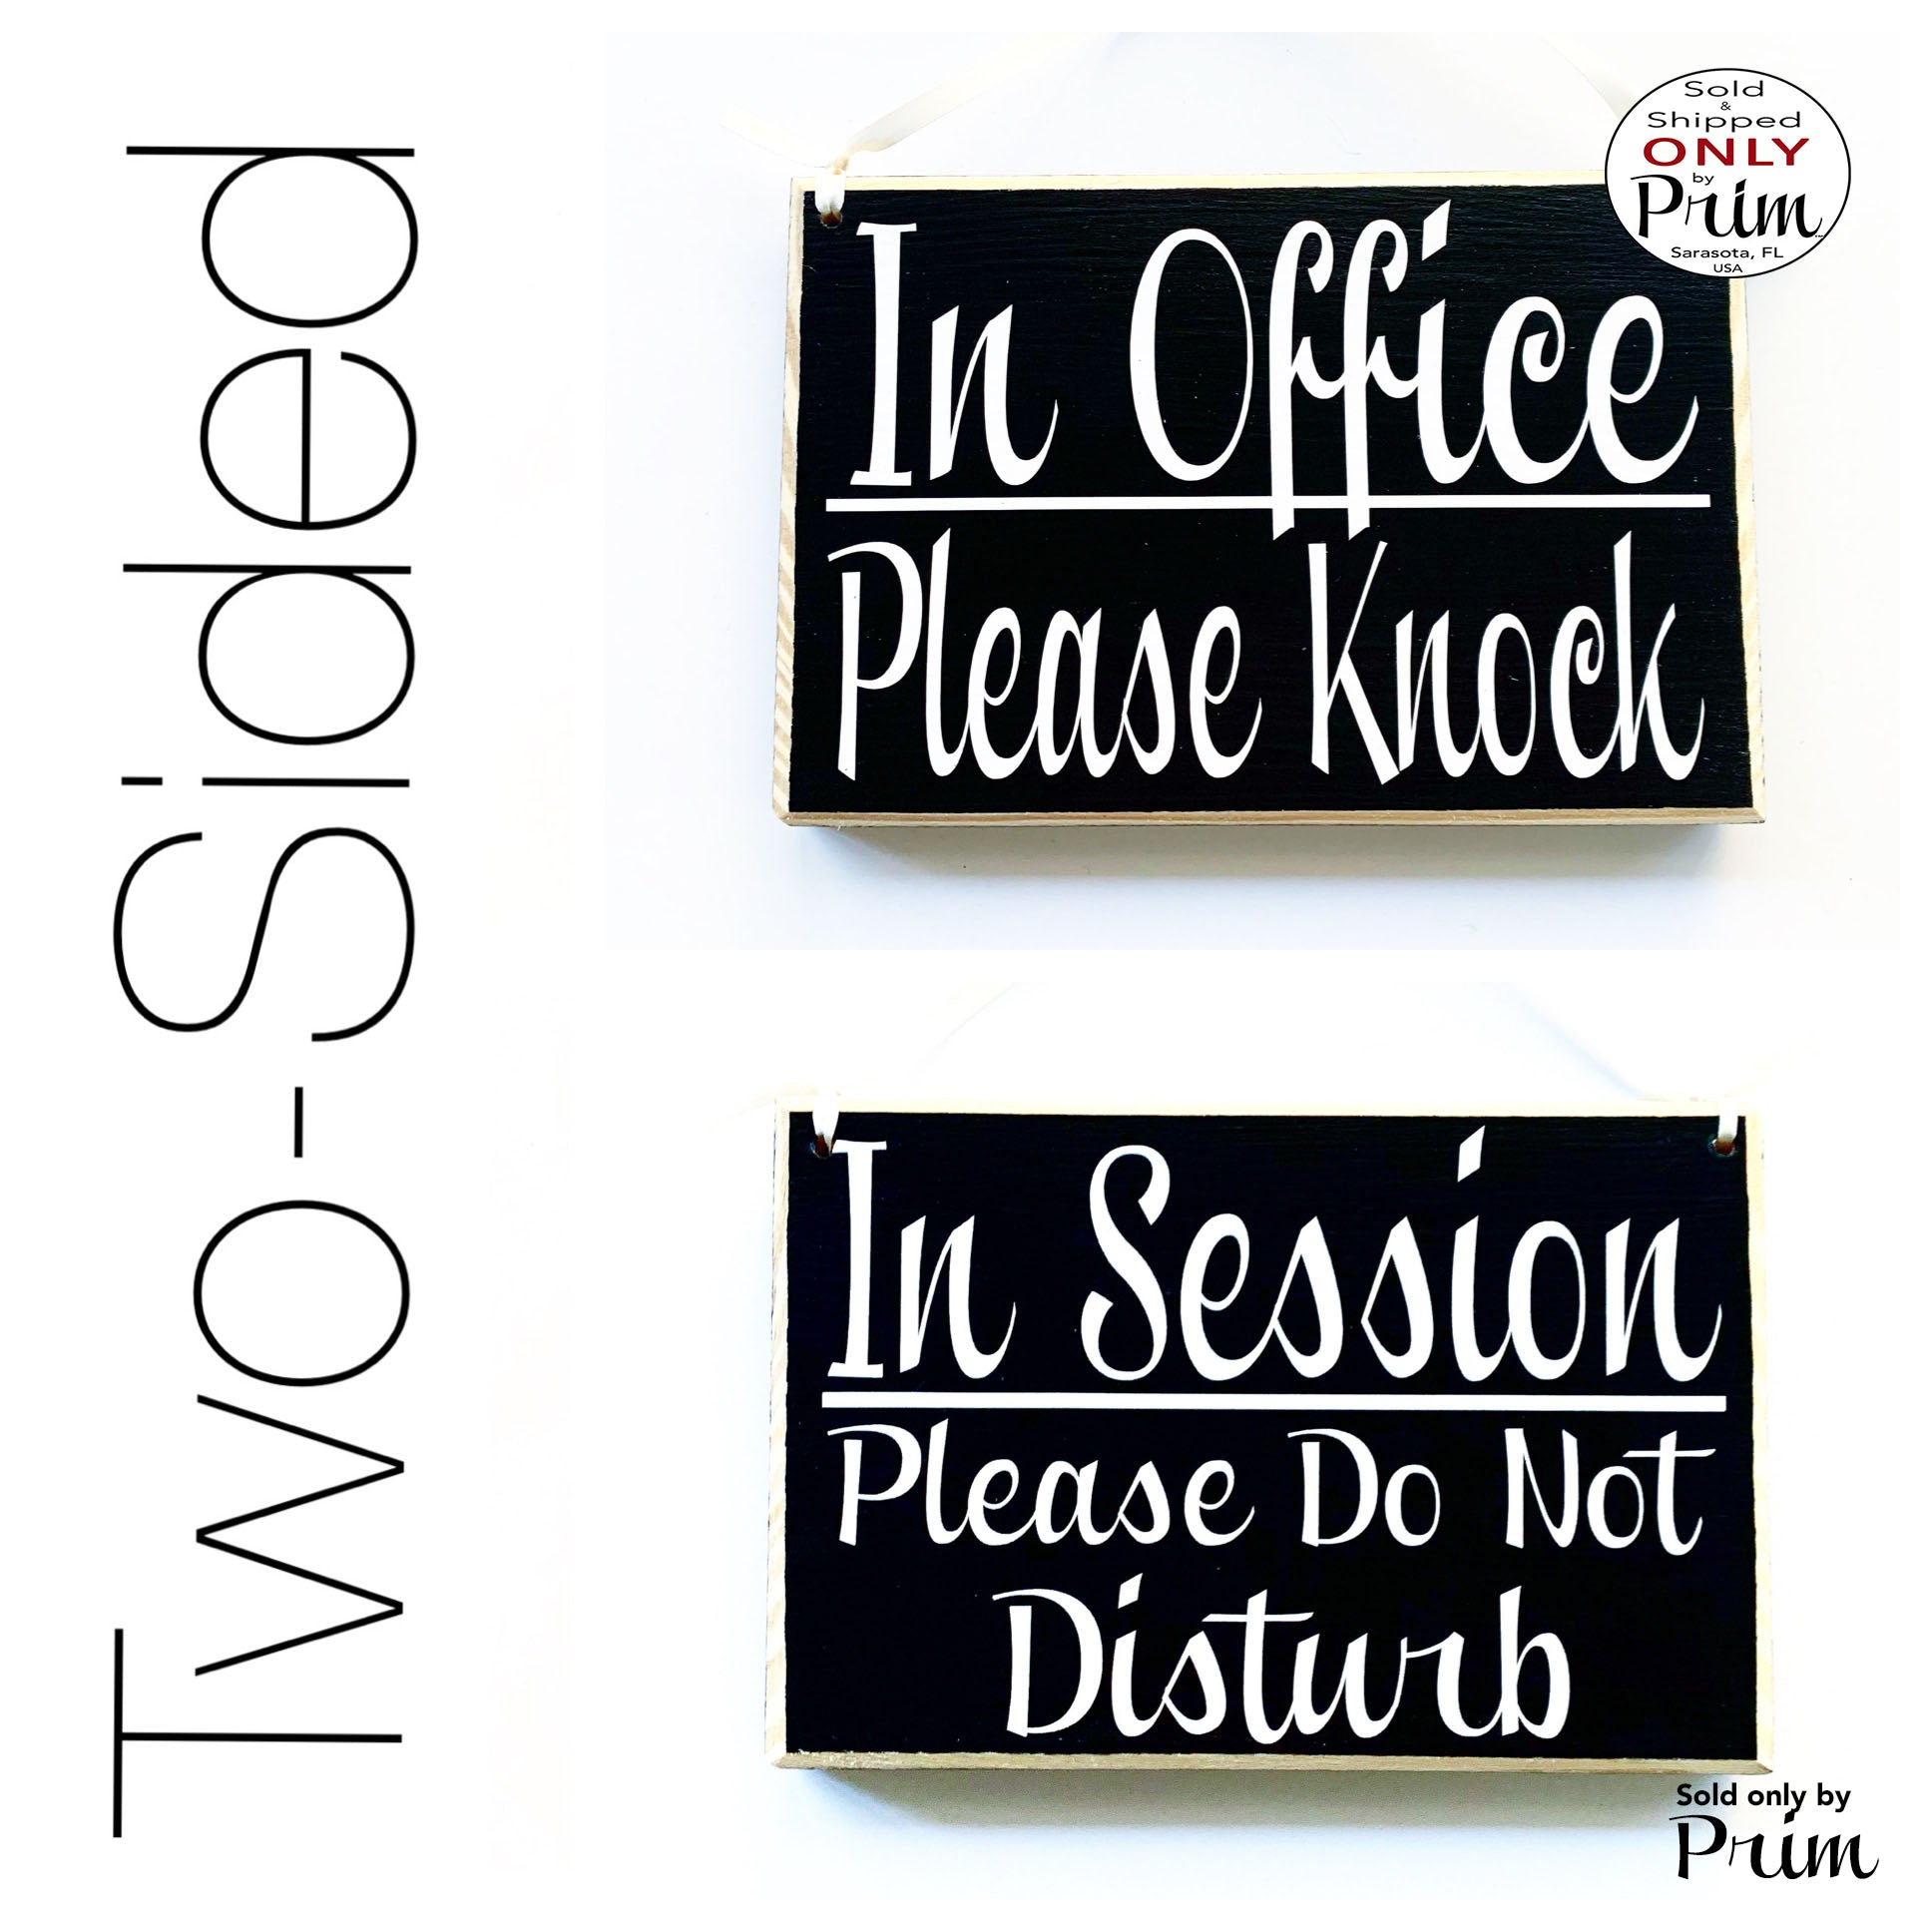 Designs by Prim Two Sided 8x6 In Session Please Do Not Disturb In Office Please Knock Custom Wood Sign Welcome Progress Business Office Door Hanger Plaque